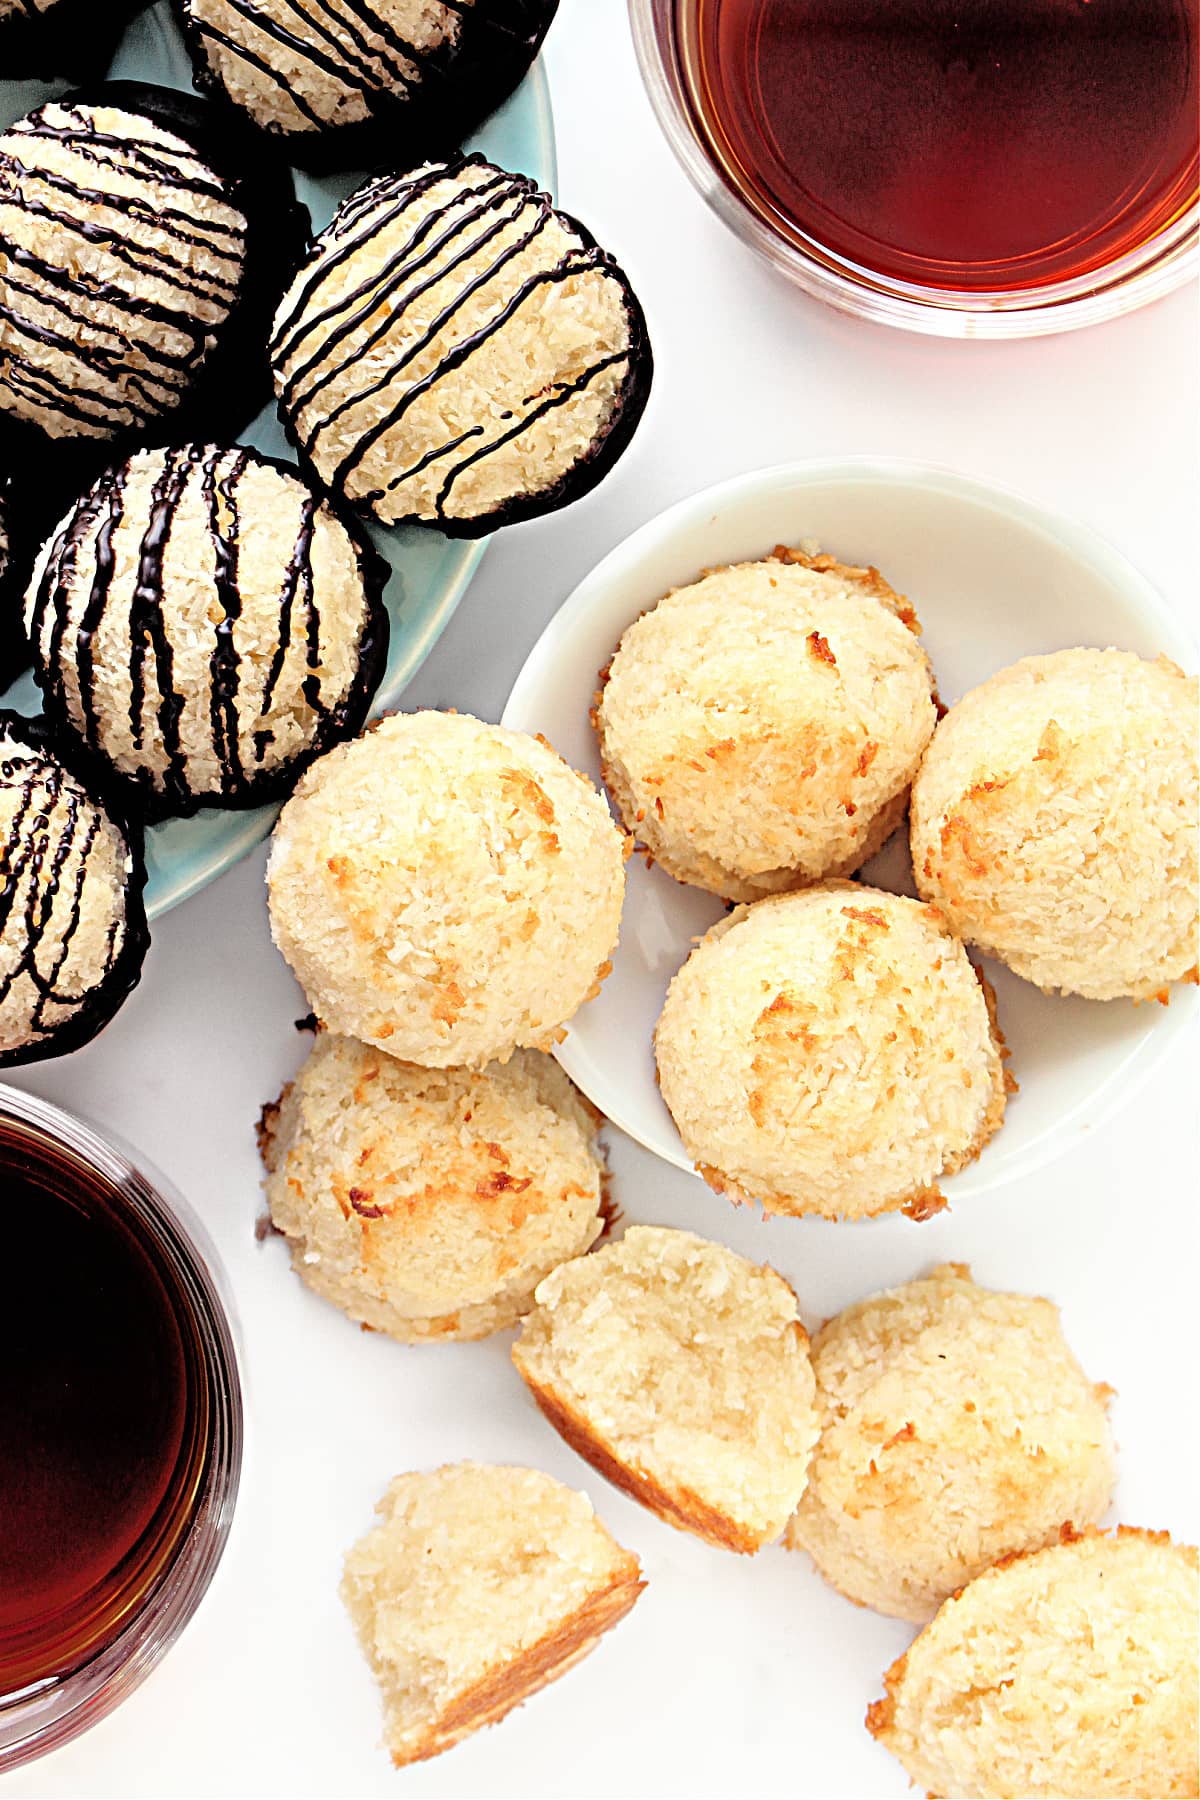 Round coconut macaroons plain and with chocolate drizzle.